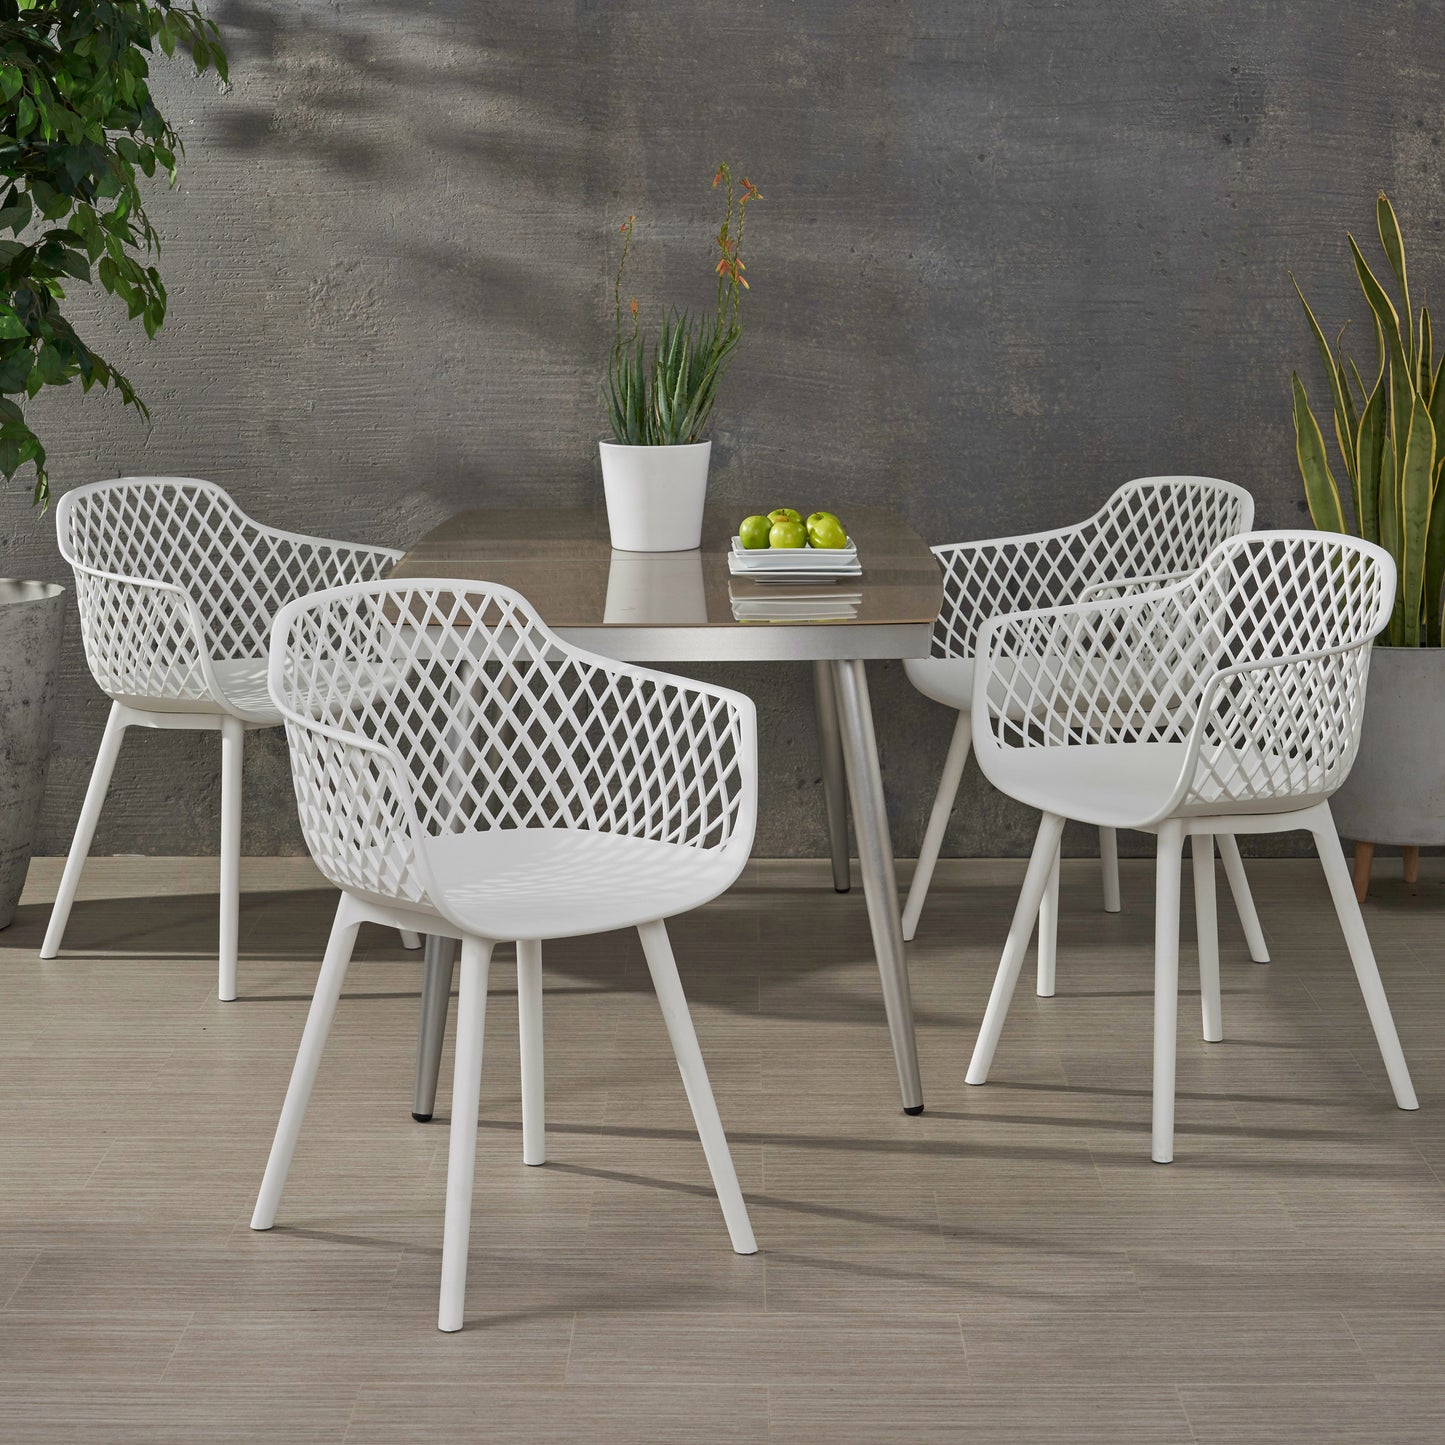 Tate Outdoor Modern Dining Chair (Set of 4)